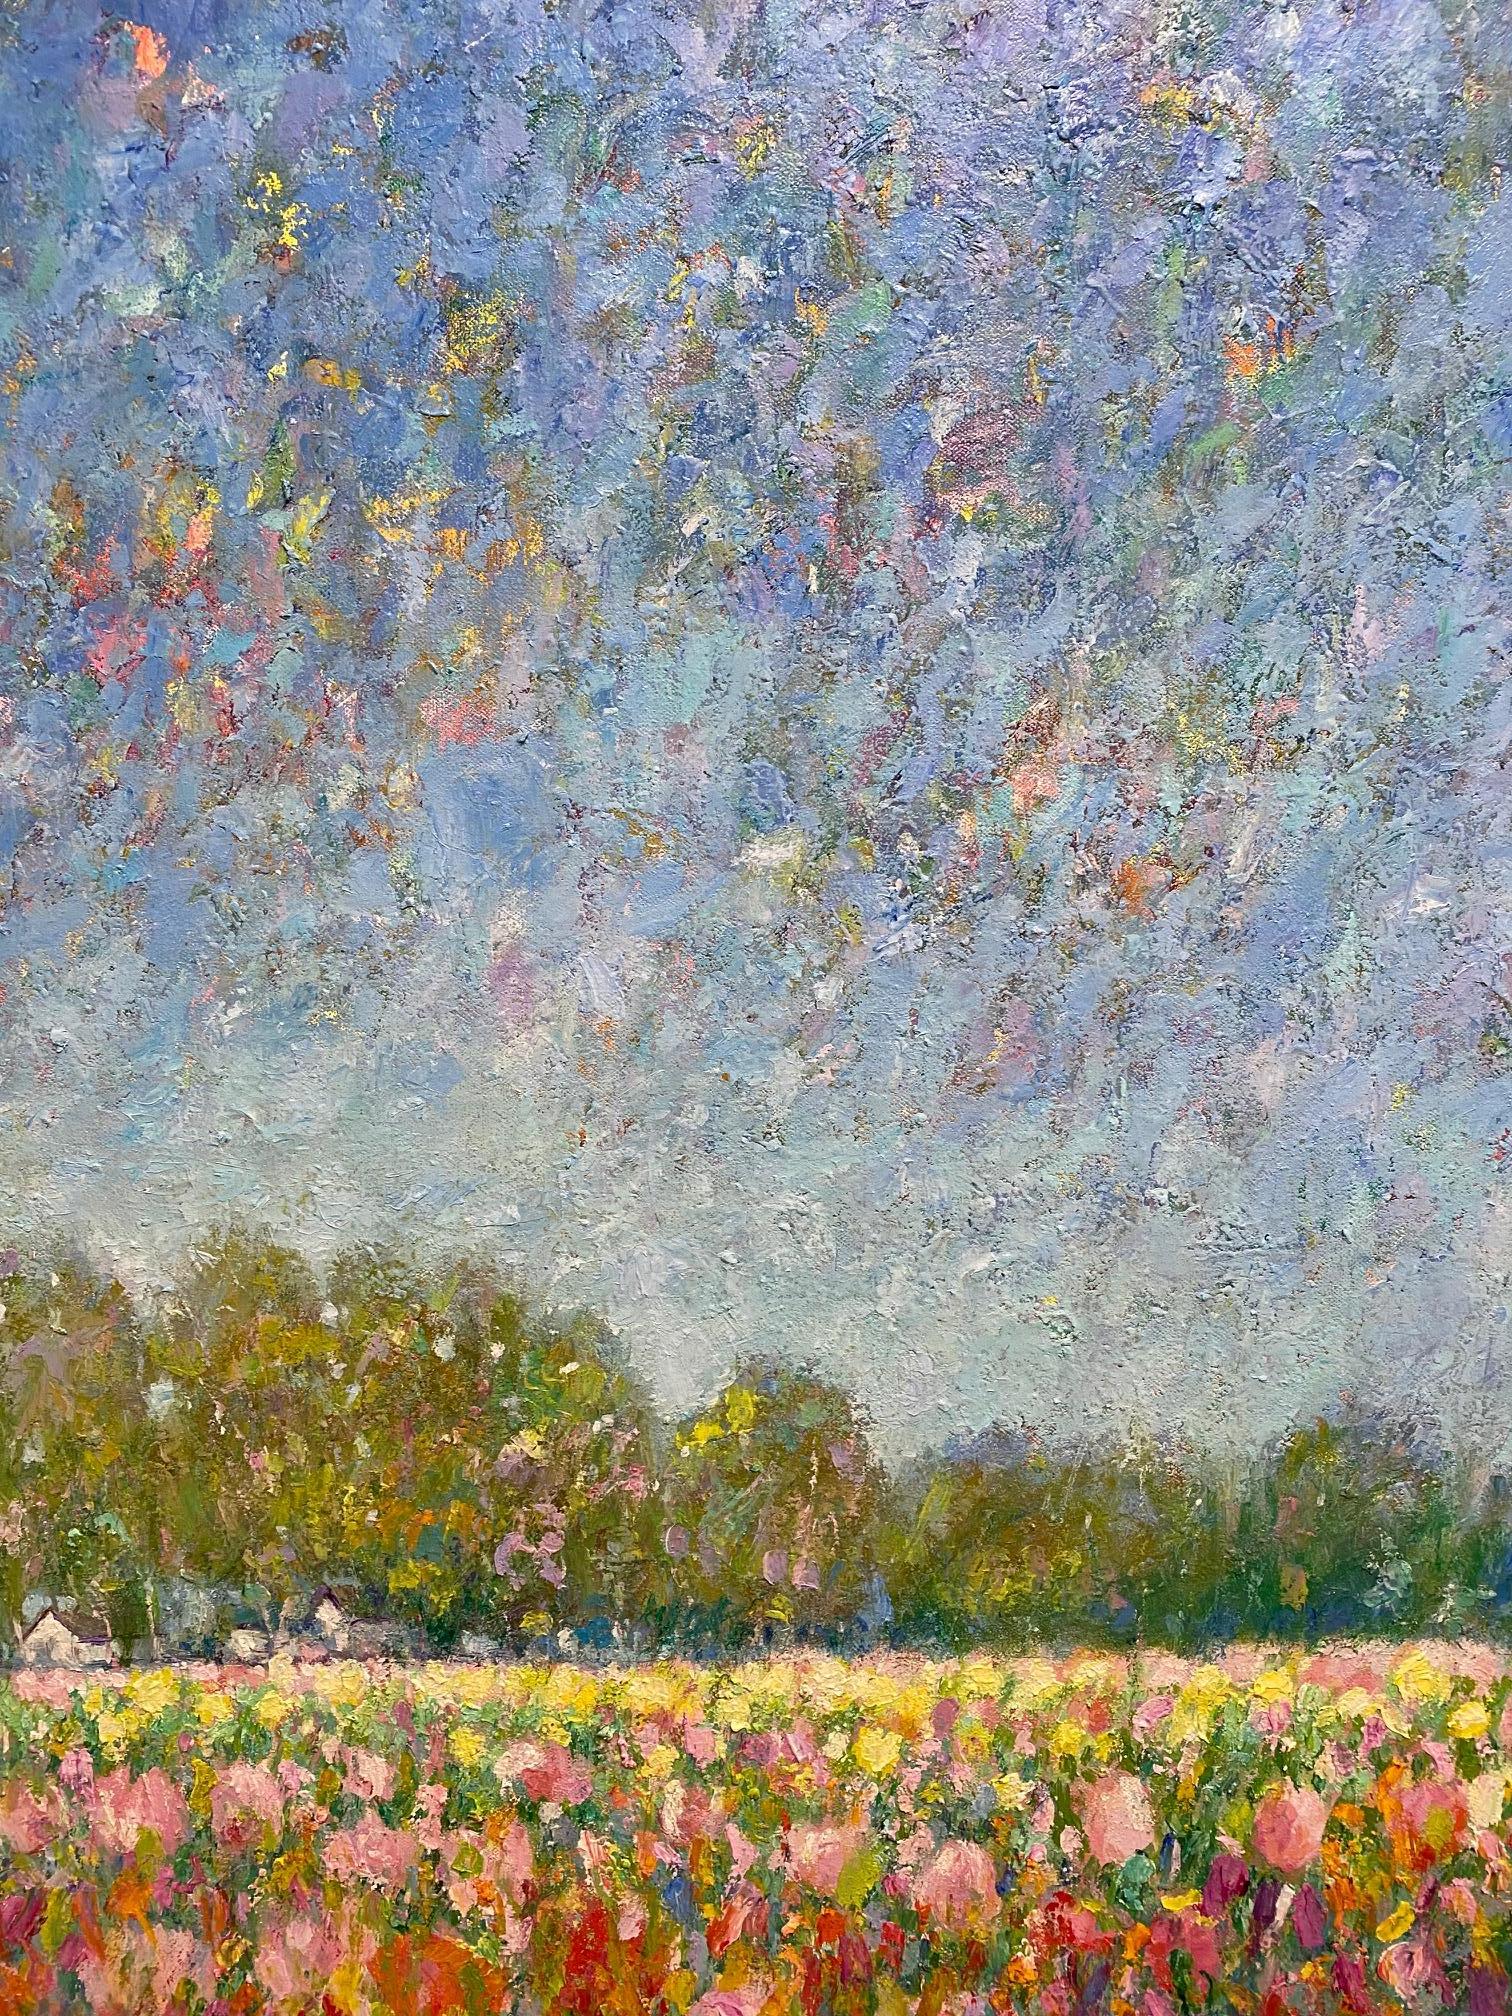 Reflections in the Sky, paysage expressionniste abstrait original 30x40 en vente 1